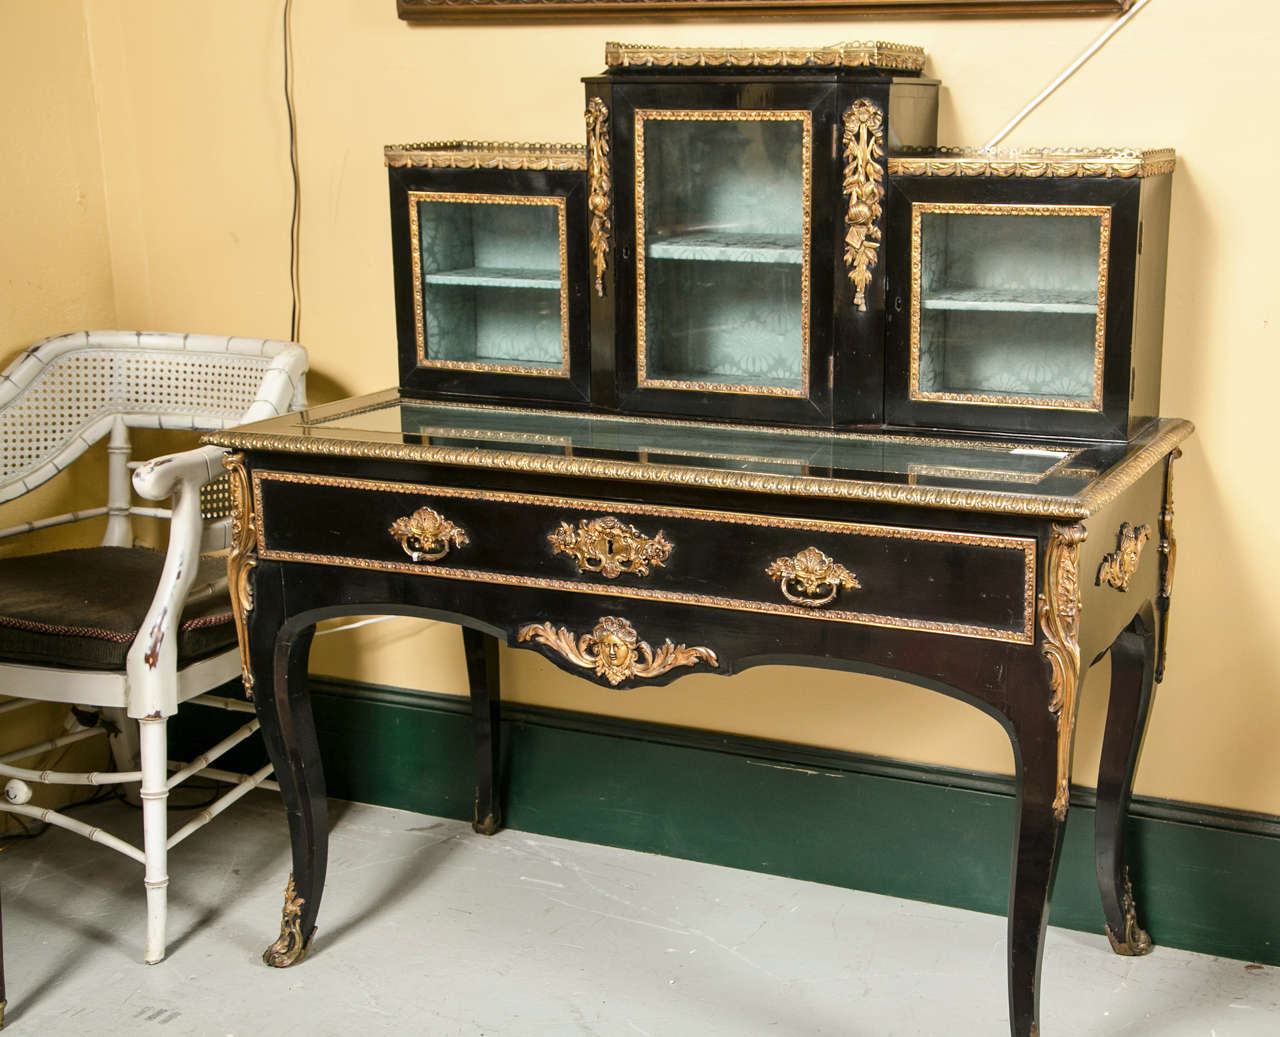 Lovely 19th / early 20th Century Showcase Desk Vitrine. Overall ebonized and adorned with gilt-bronze mounts, the galleried top of a three part shelving unit, on top of a glass top showcase table with a single drawer, raised on cabriole legs ending